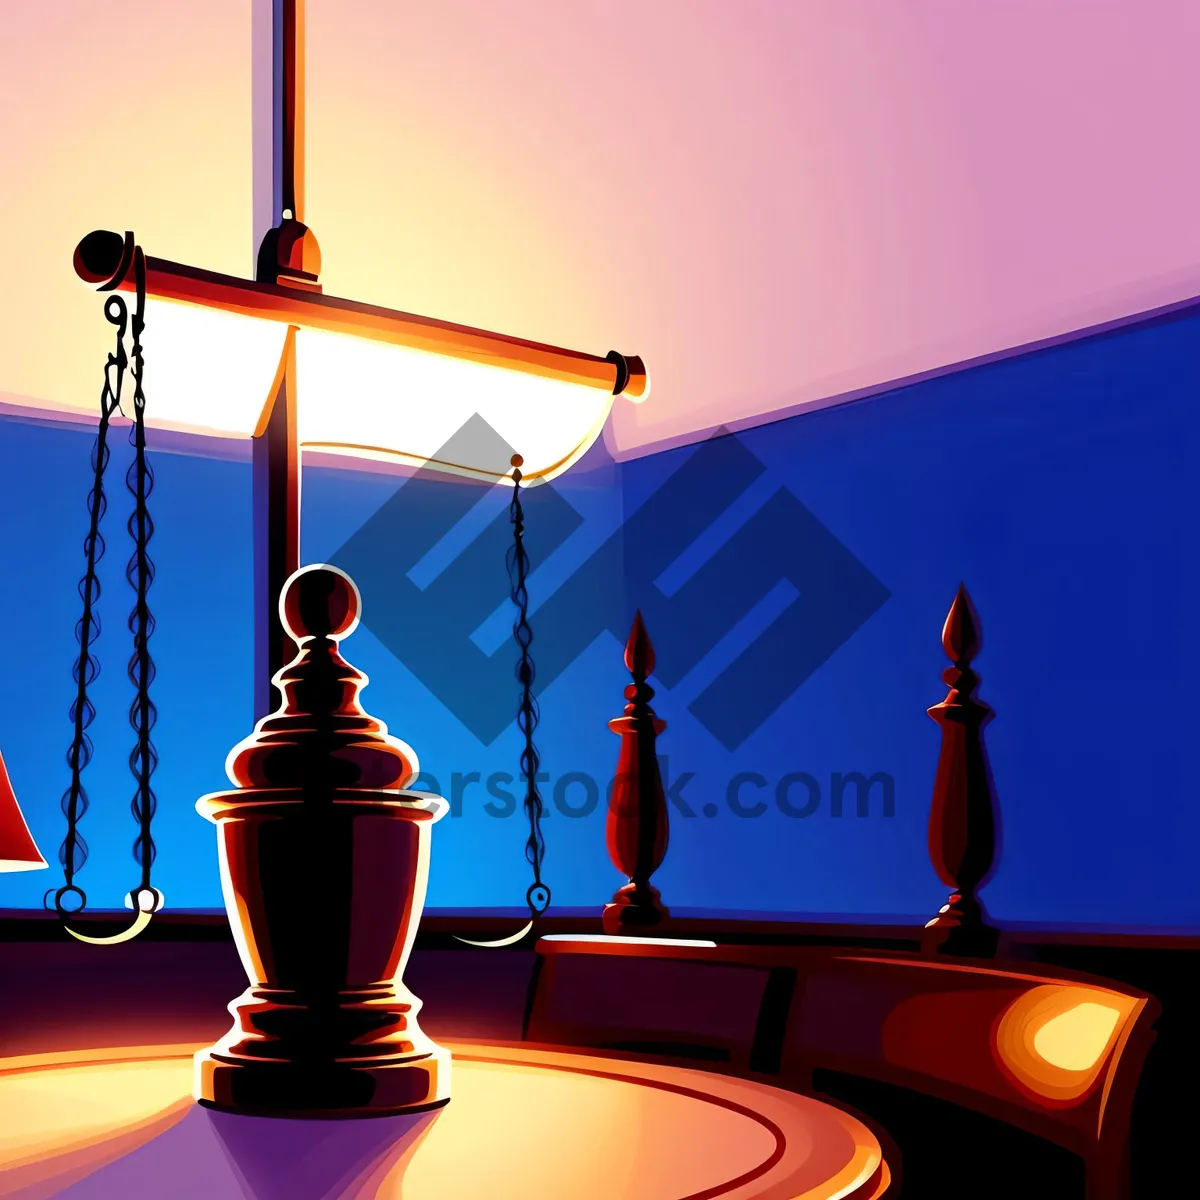 Picture of Golden Justice: Illuminating the Scales of Law